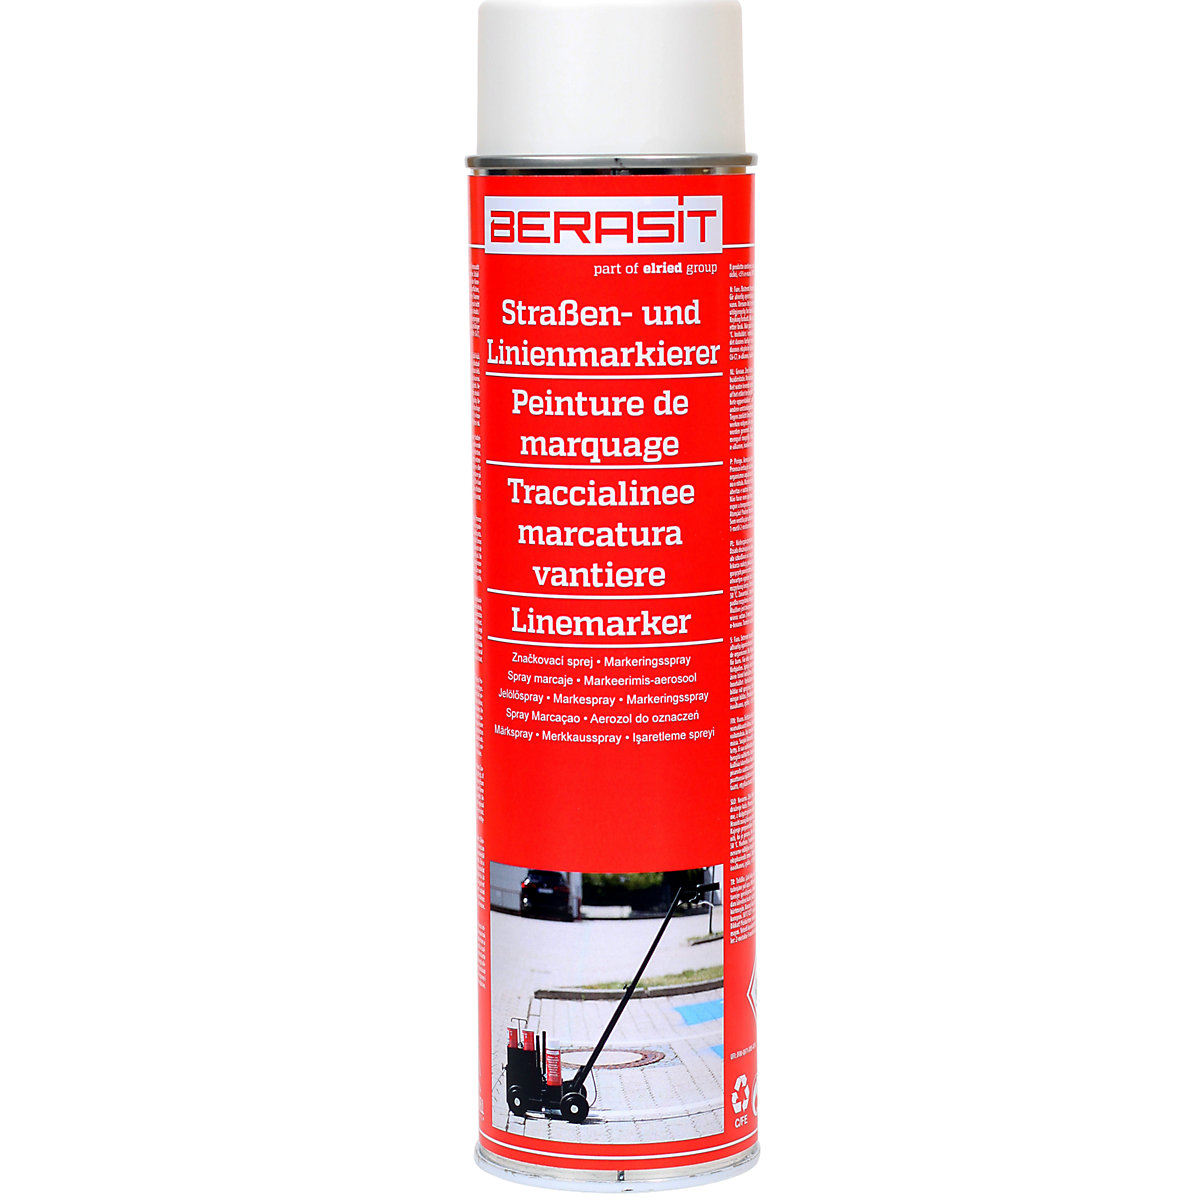 Marking paint, contents 600 ml